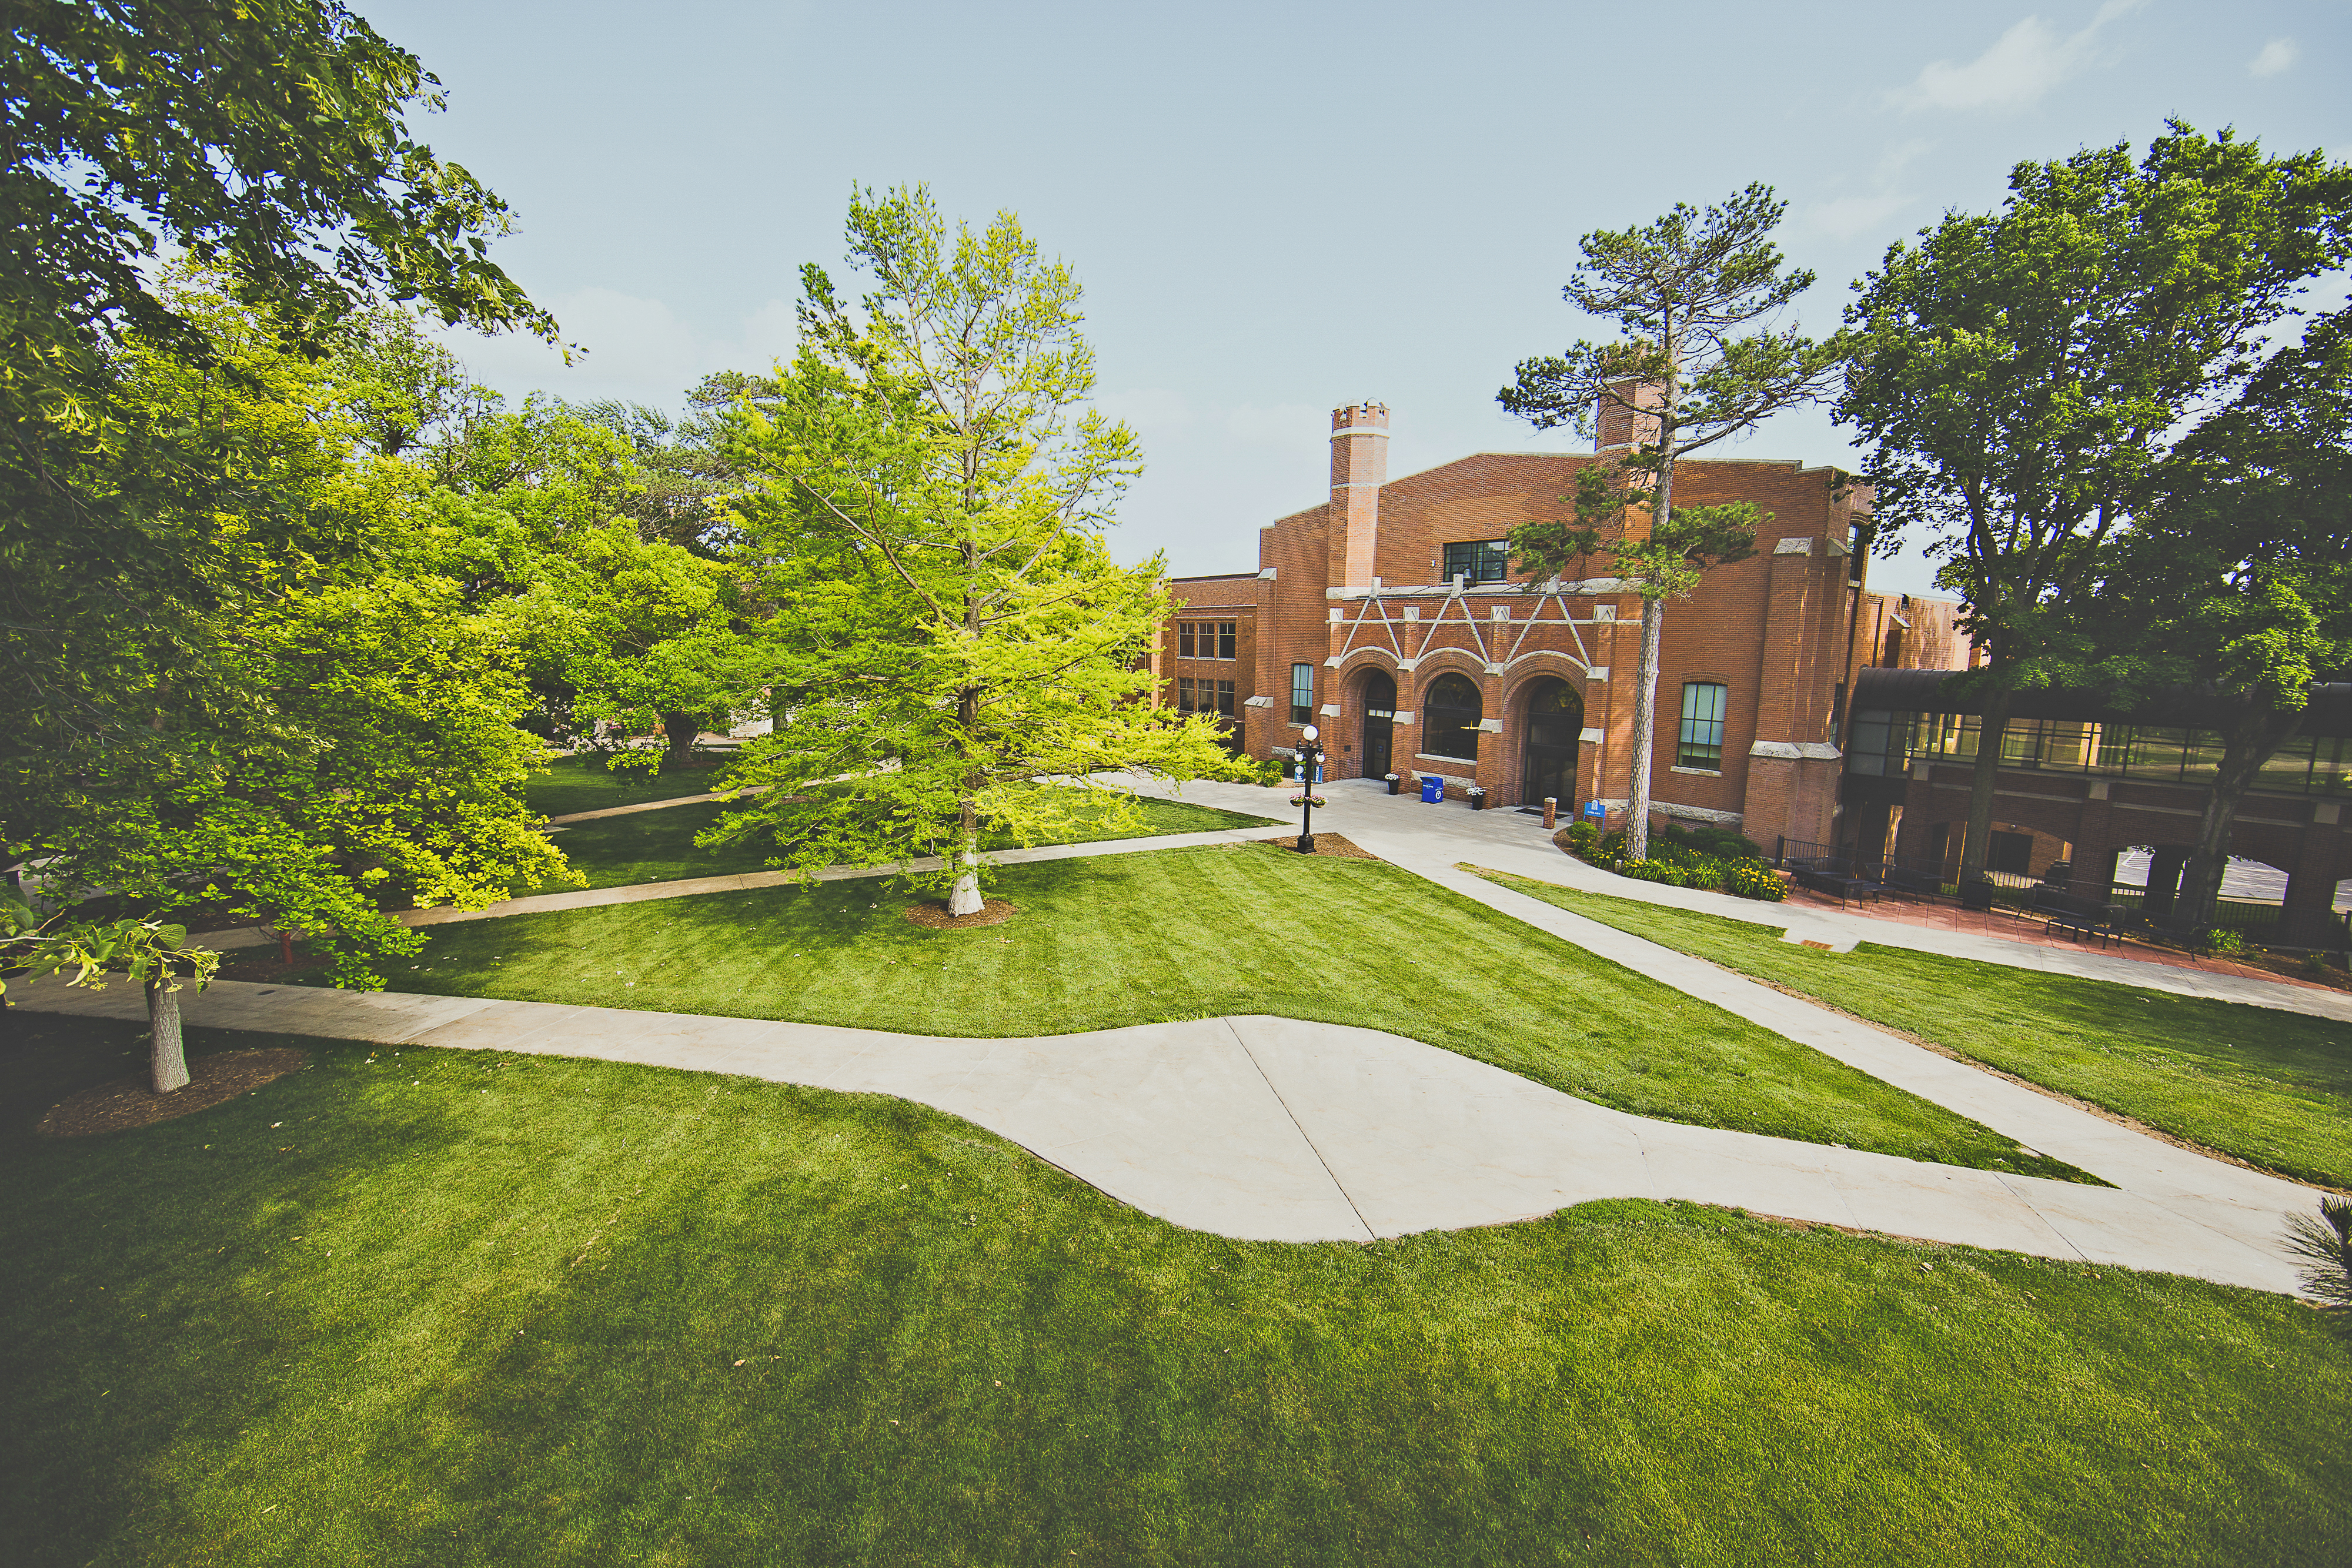 This is an aerial view of the center of our quad, showing the Library in the background.